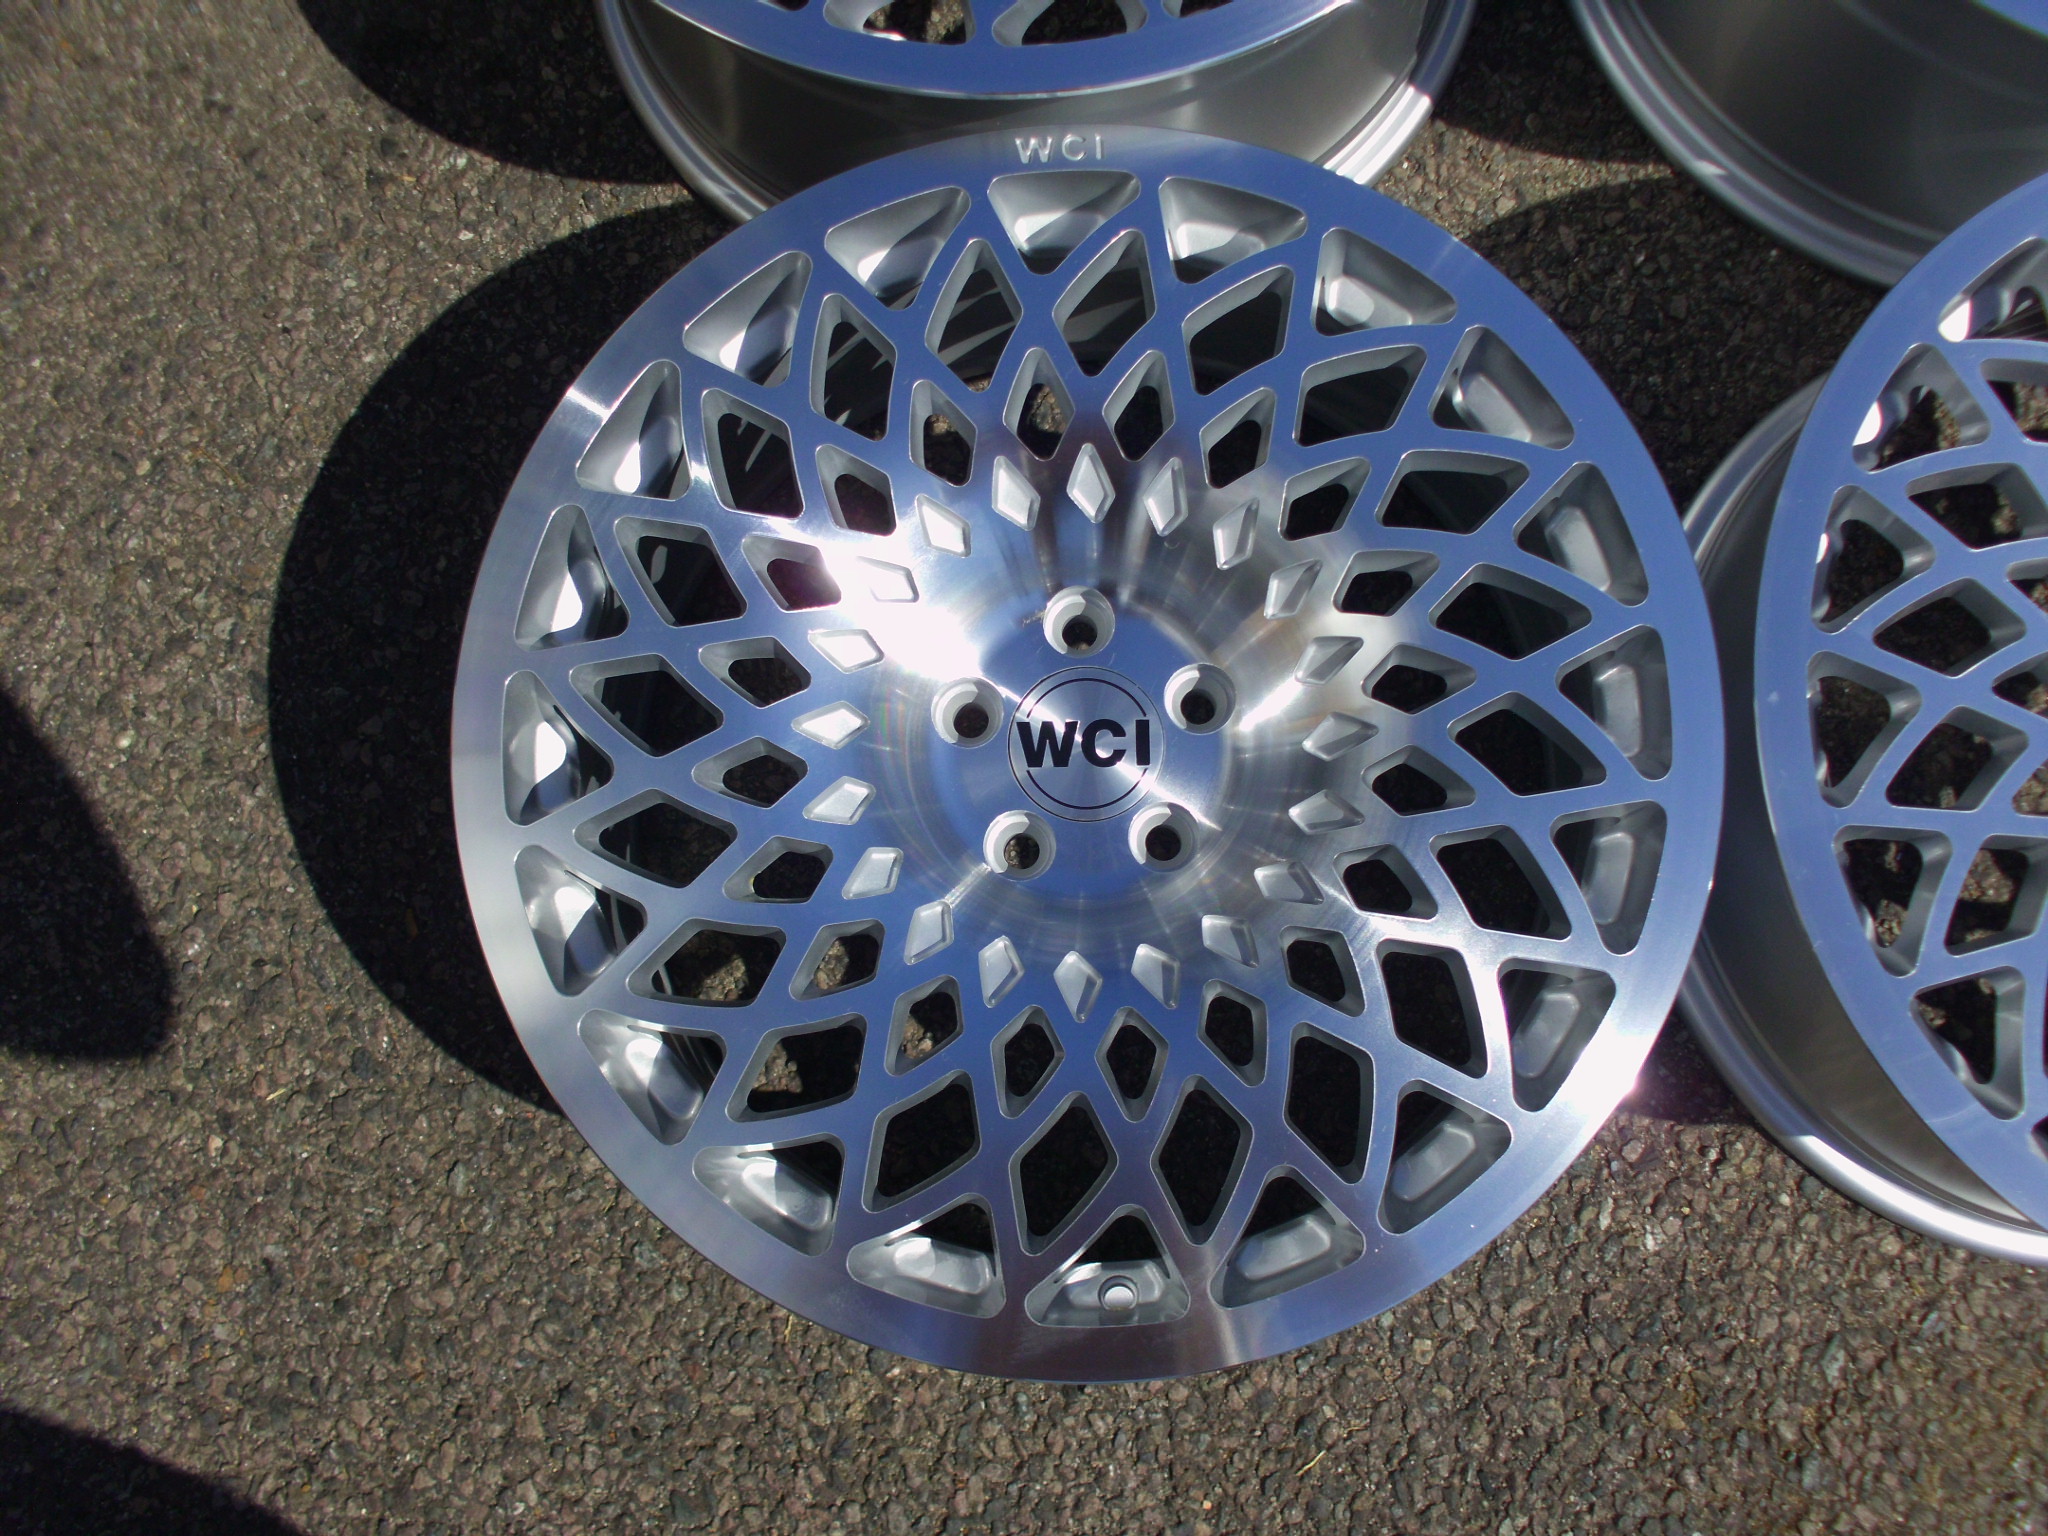 NEW 18" WCI MT10 ALLOY WHEELS IN HYPER SILVER WITH POLISHED FACE, EXTREME CONCAVE REARS et35/35